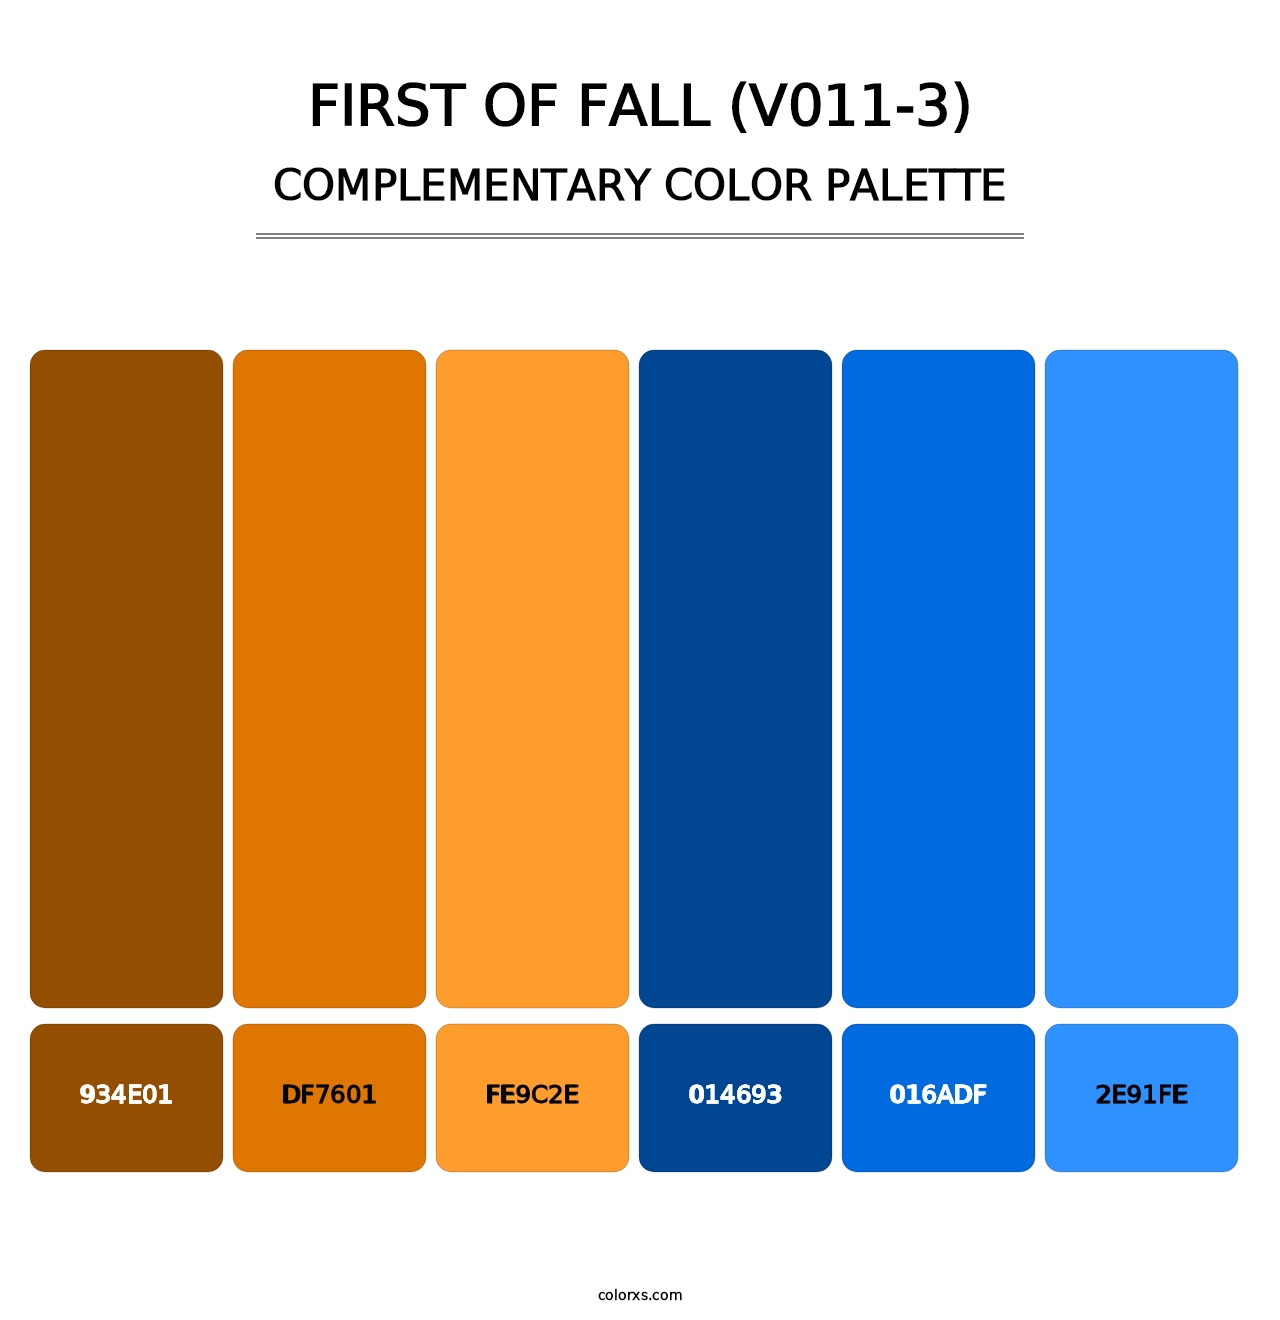 First of Fall (V011-3) - Complementary Color Palette